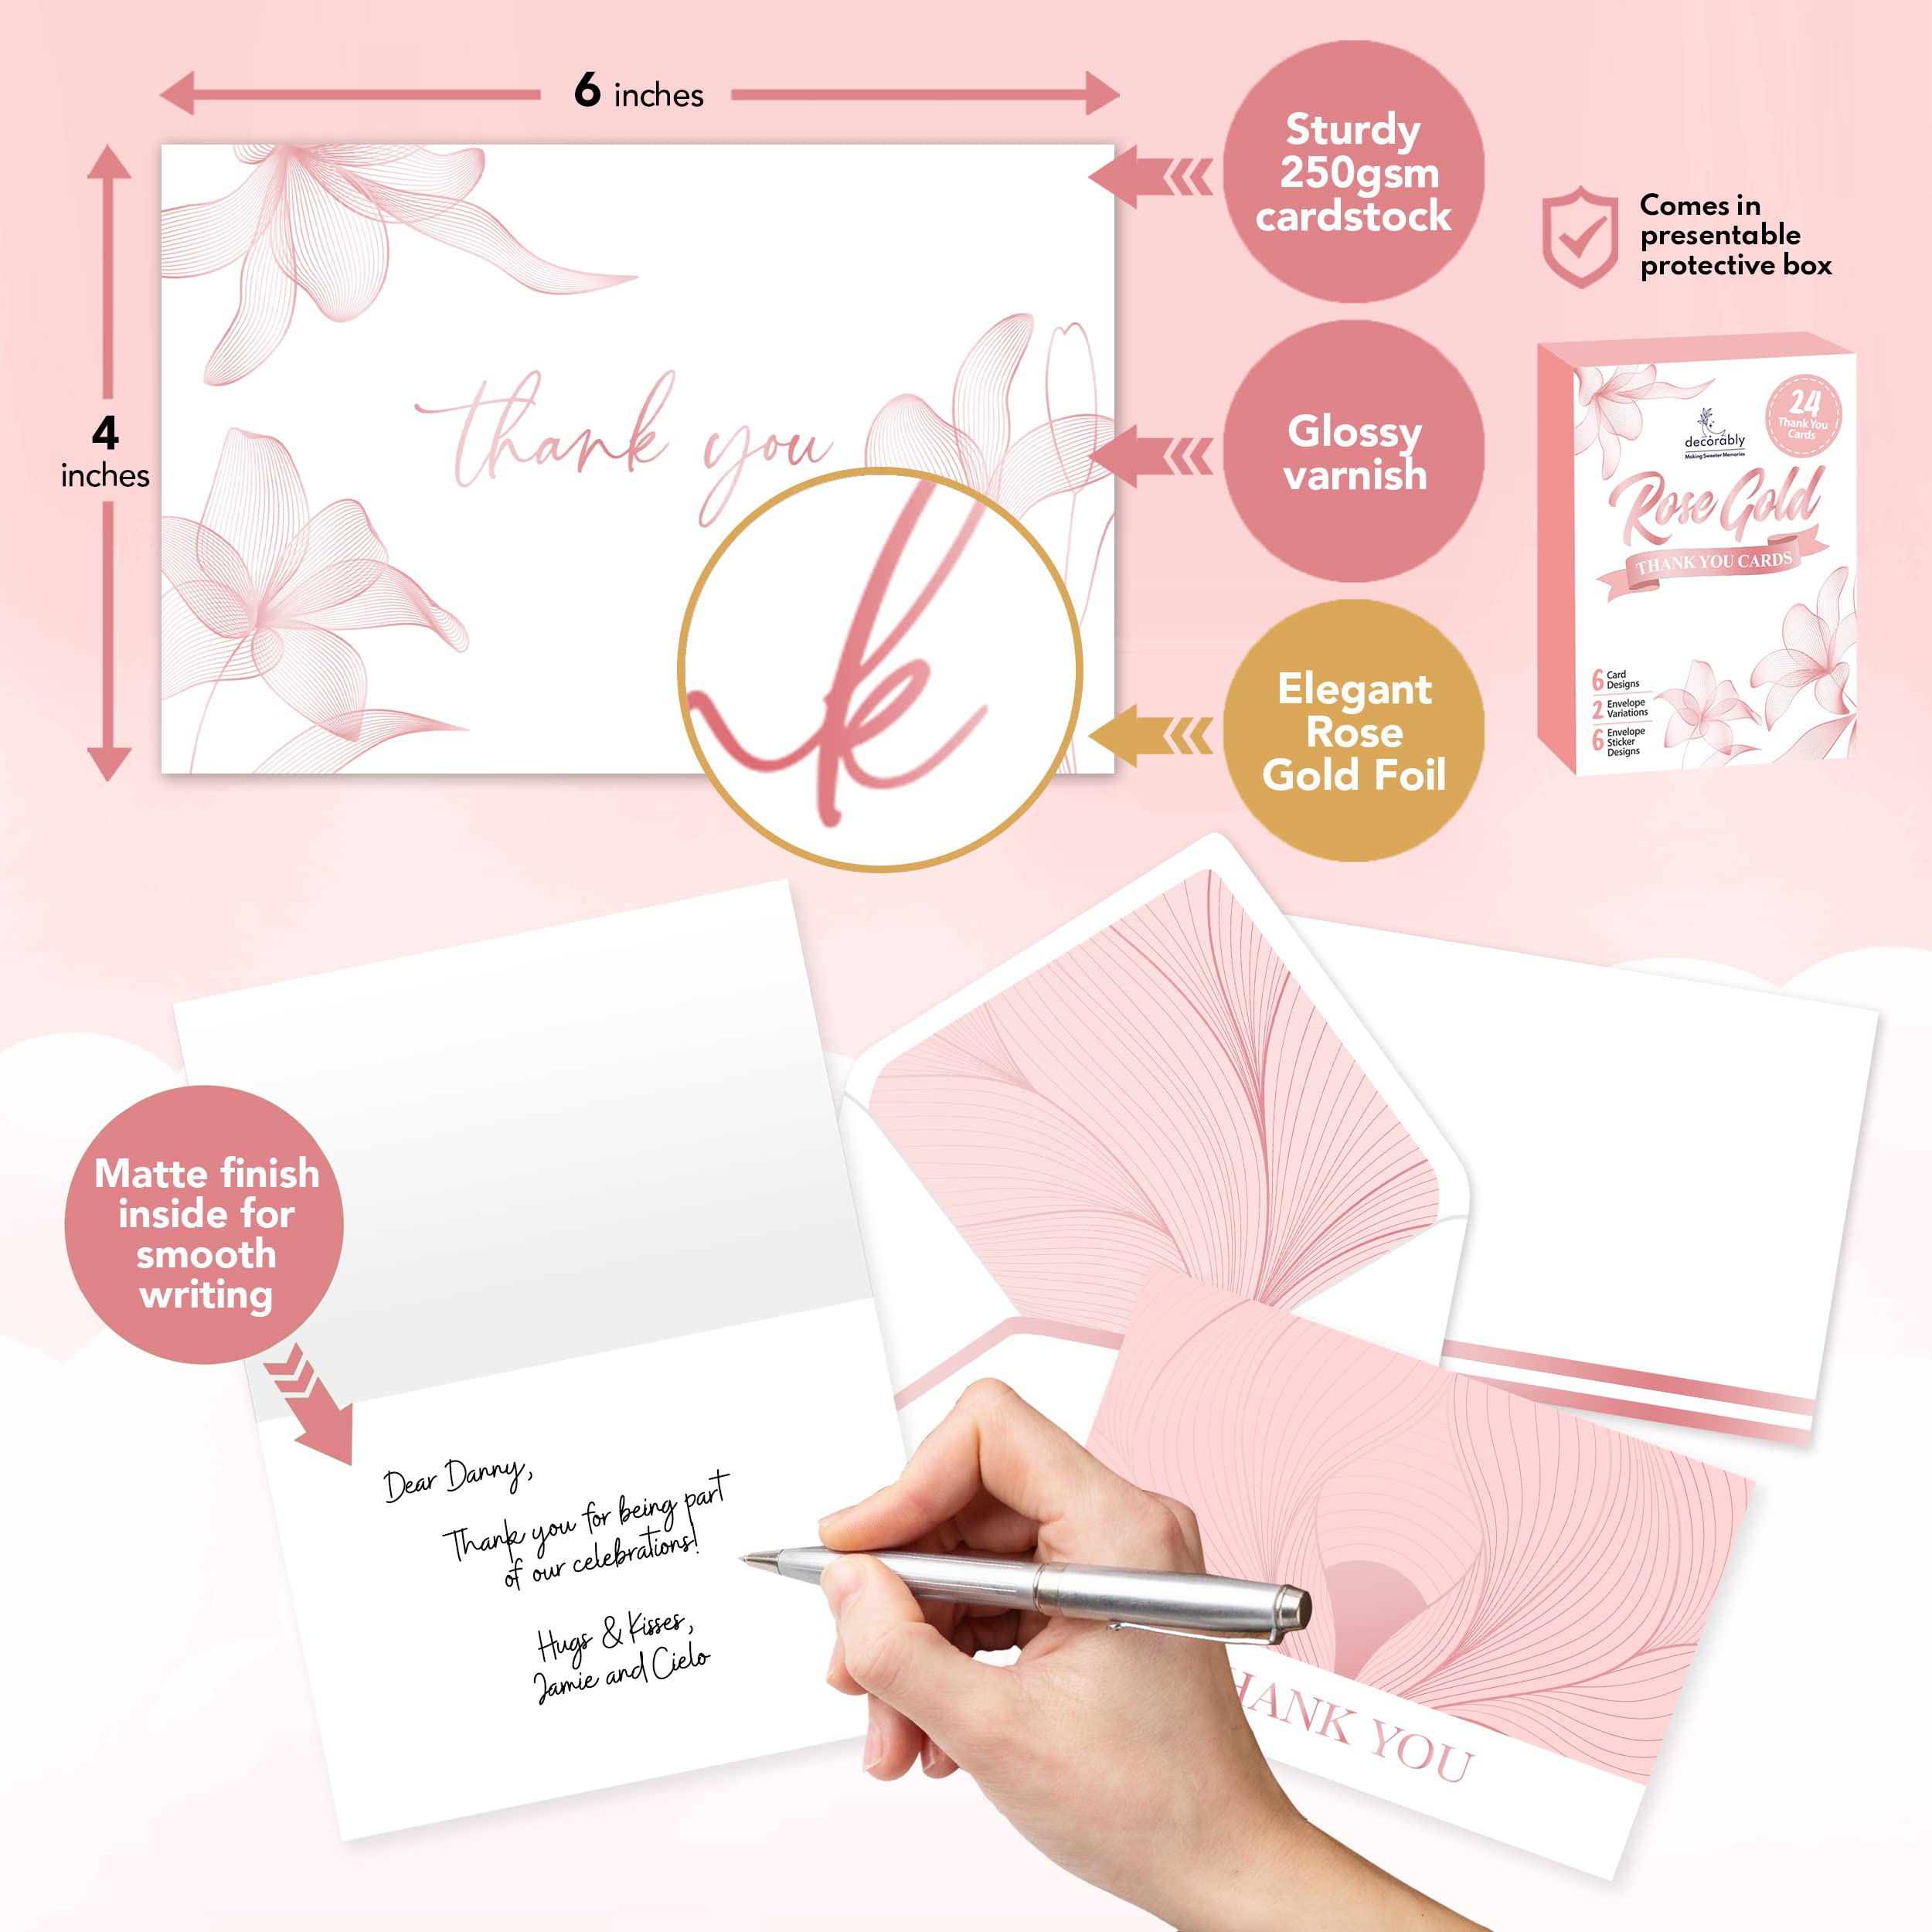 24 Rose Gold-Foiled Pink Thank You Cards with Envelopes - 6x4in Rose Gold Thank You Cards with Envelopes Pink, 6 Designs Pink Baby Shower Thank You Cards Girl, Girl Baby Shower Thank You Cards Pink